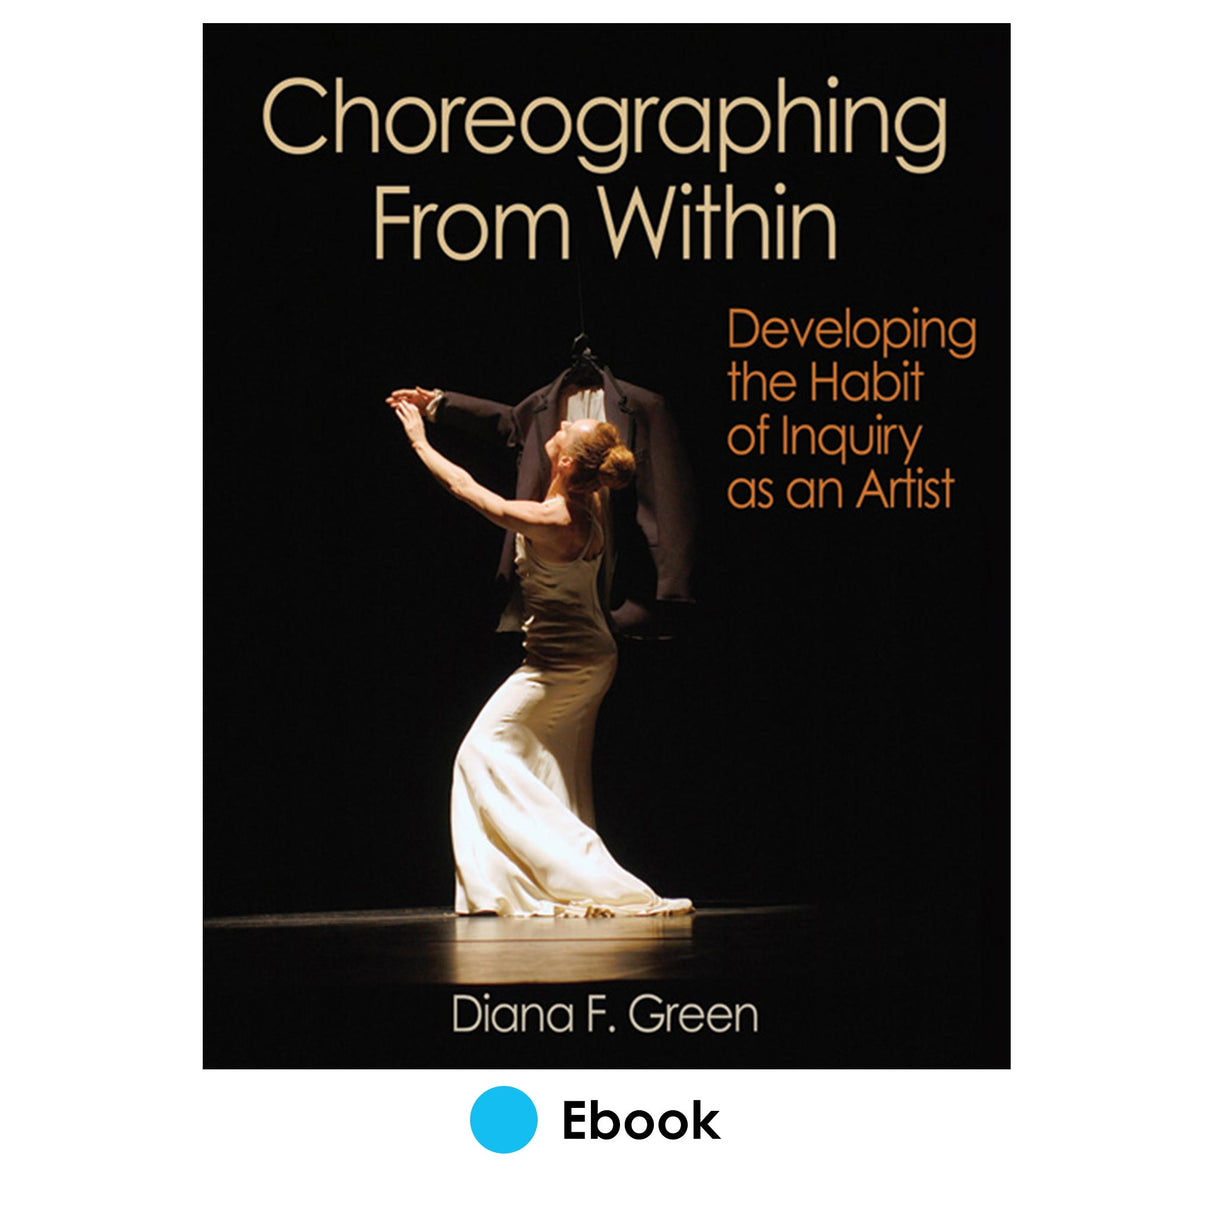 Choreographing From Within PDF